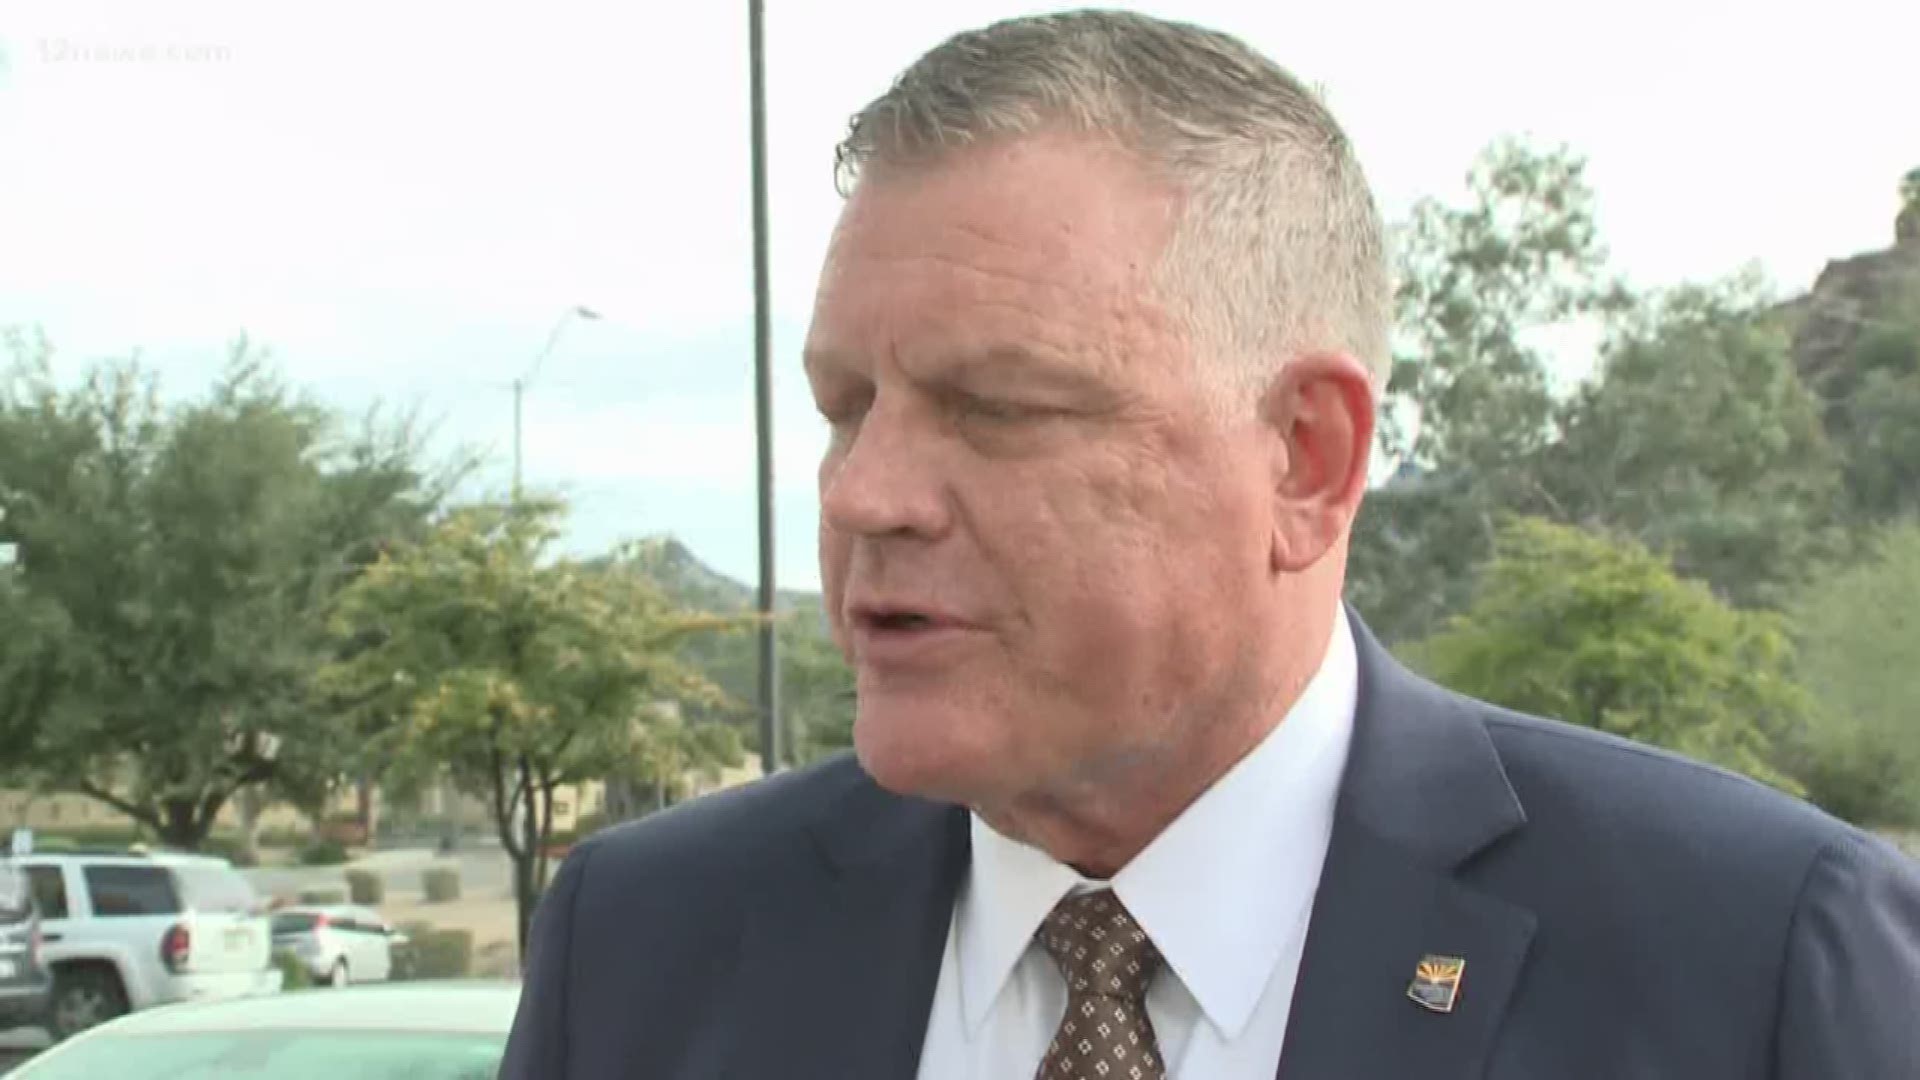 "I might speed again" joked Col. Frank Milstead after he was pulled over. A deputy says the DPS director was going 90+ miles per hour in October.